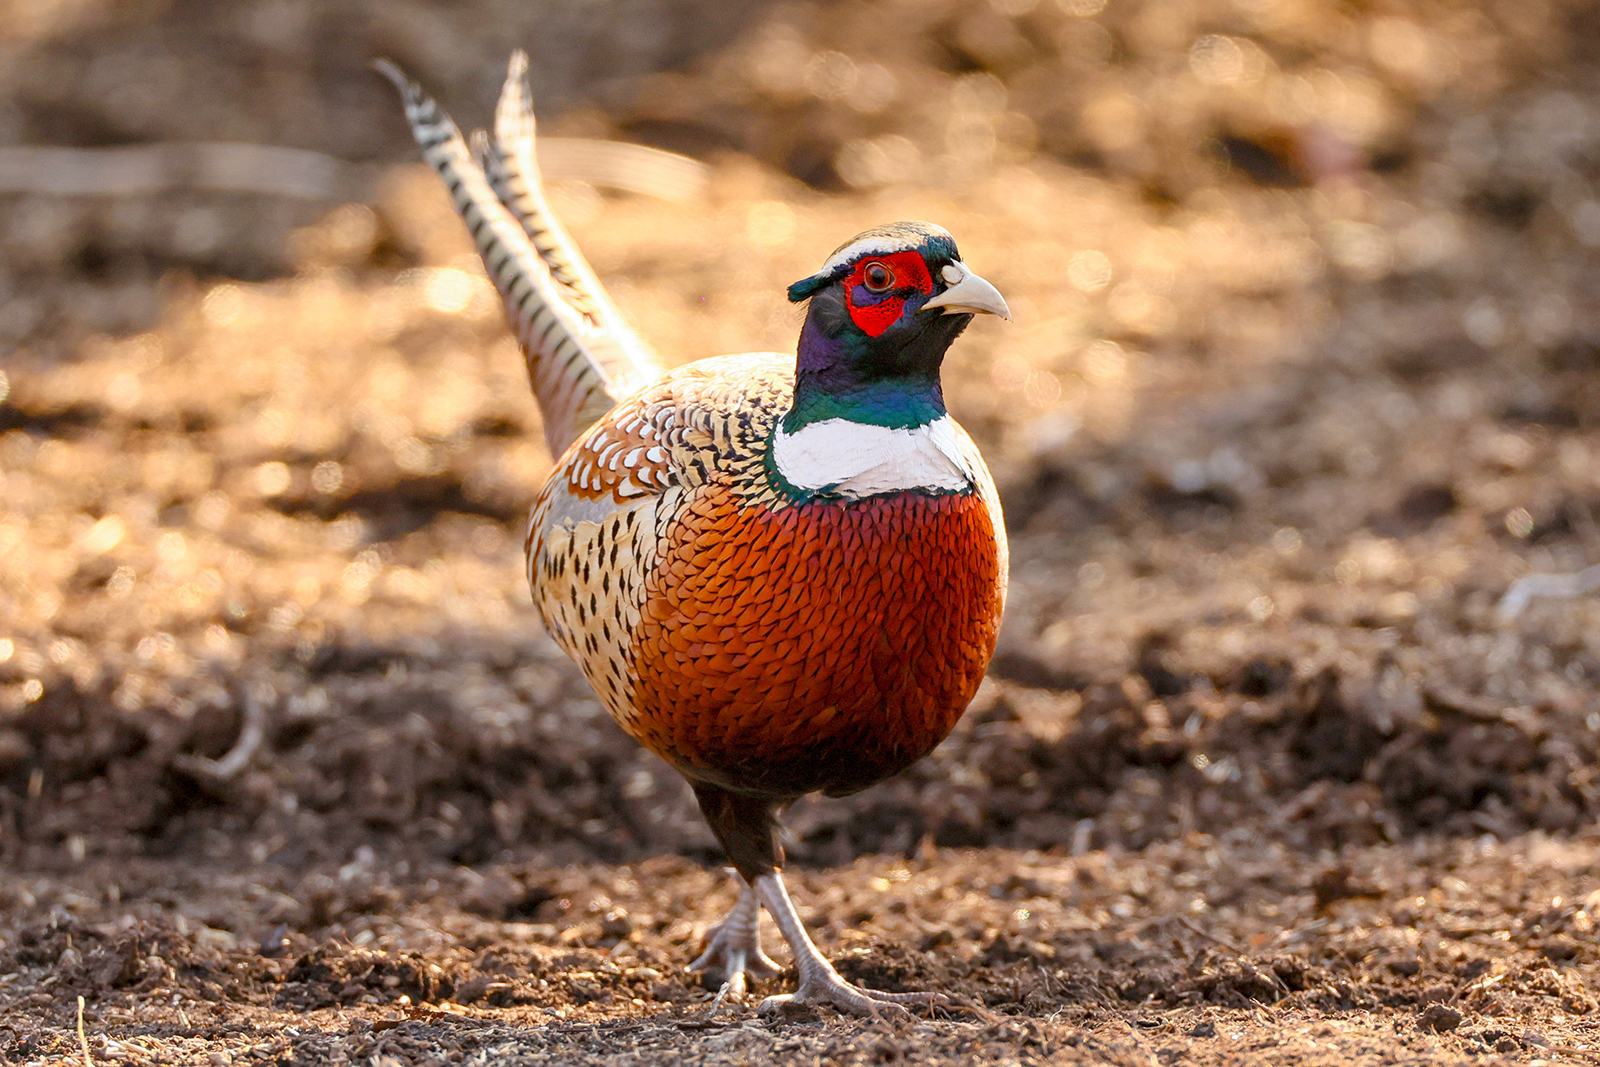 A pheasant is seen at the Leopard National Park in Russia. /IC